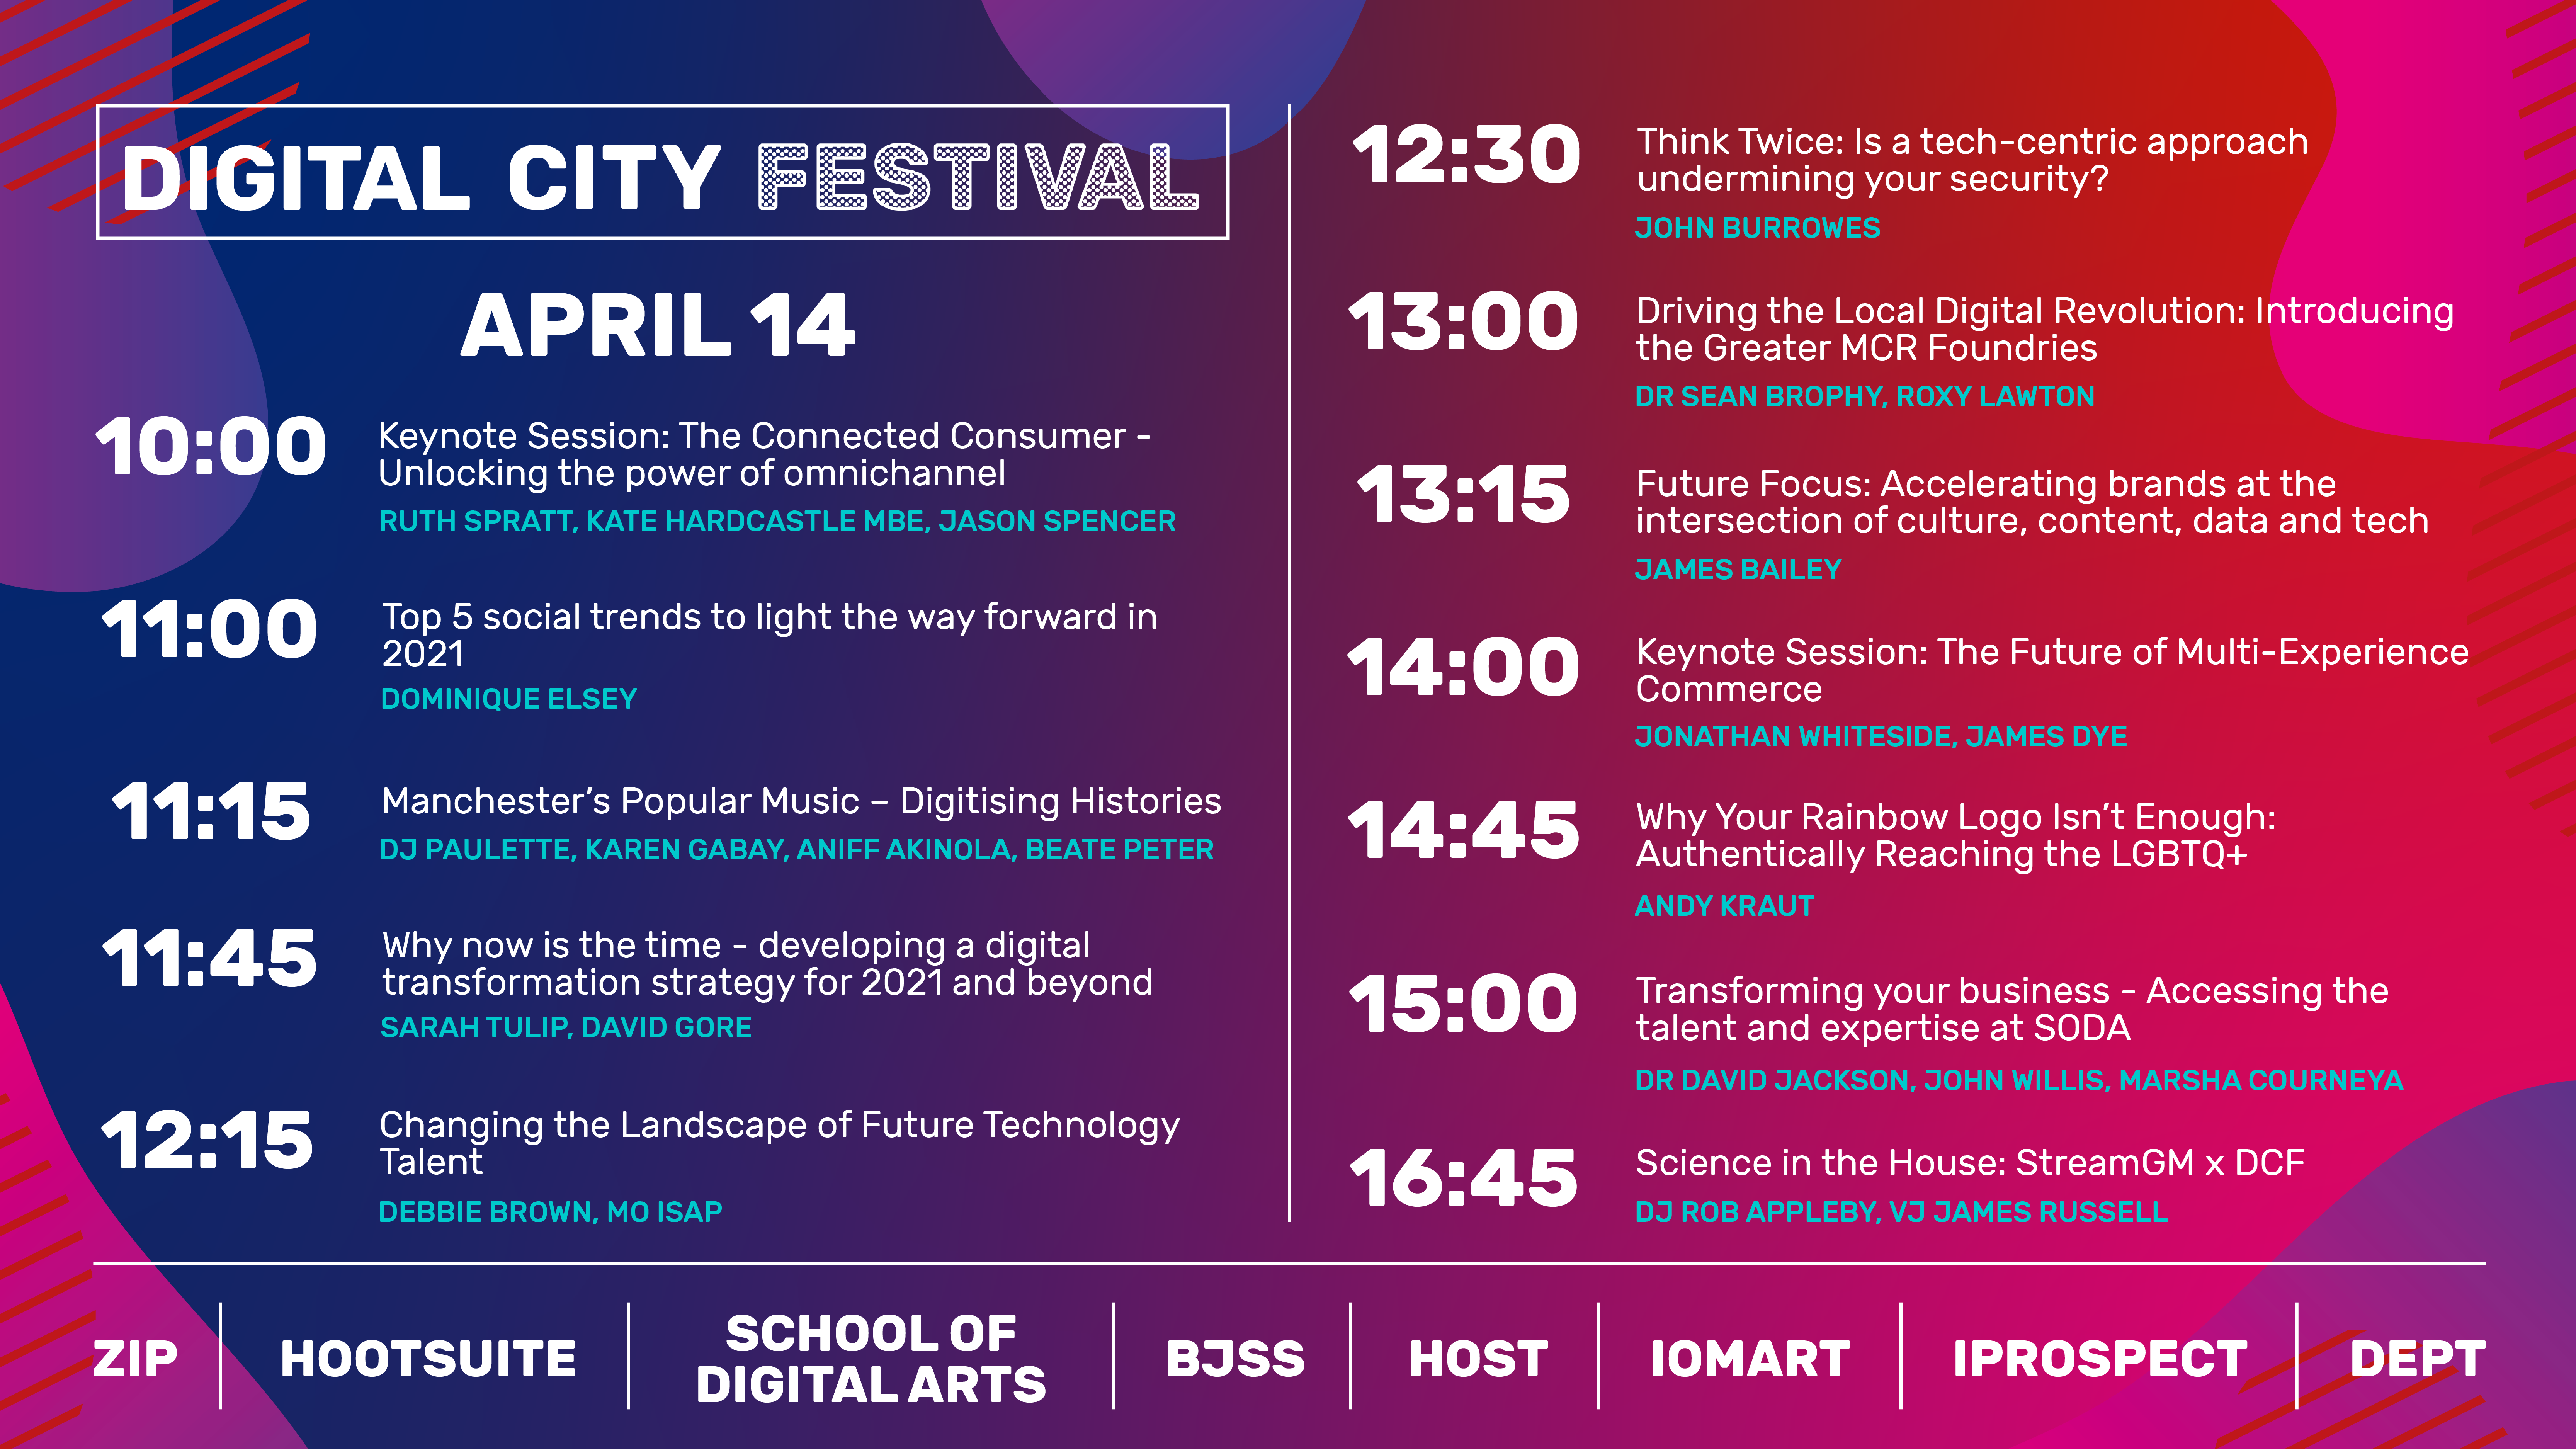 WEDNESDAY 14: Thought leadership continues at Digital City Festival with talks by Hootsuite's Dominique Elsey, Grindr's Andy Kraut, and ITV's Jason Spencer